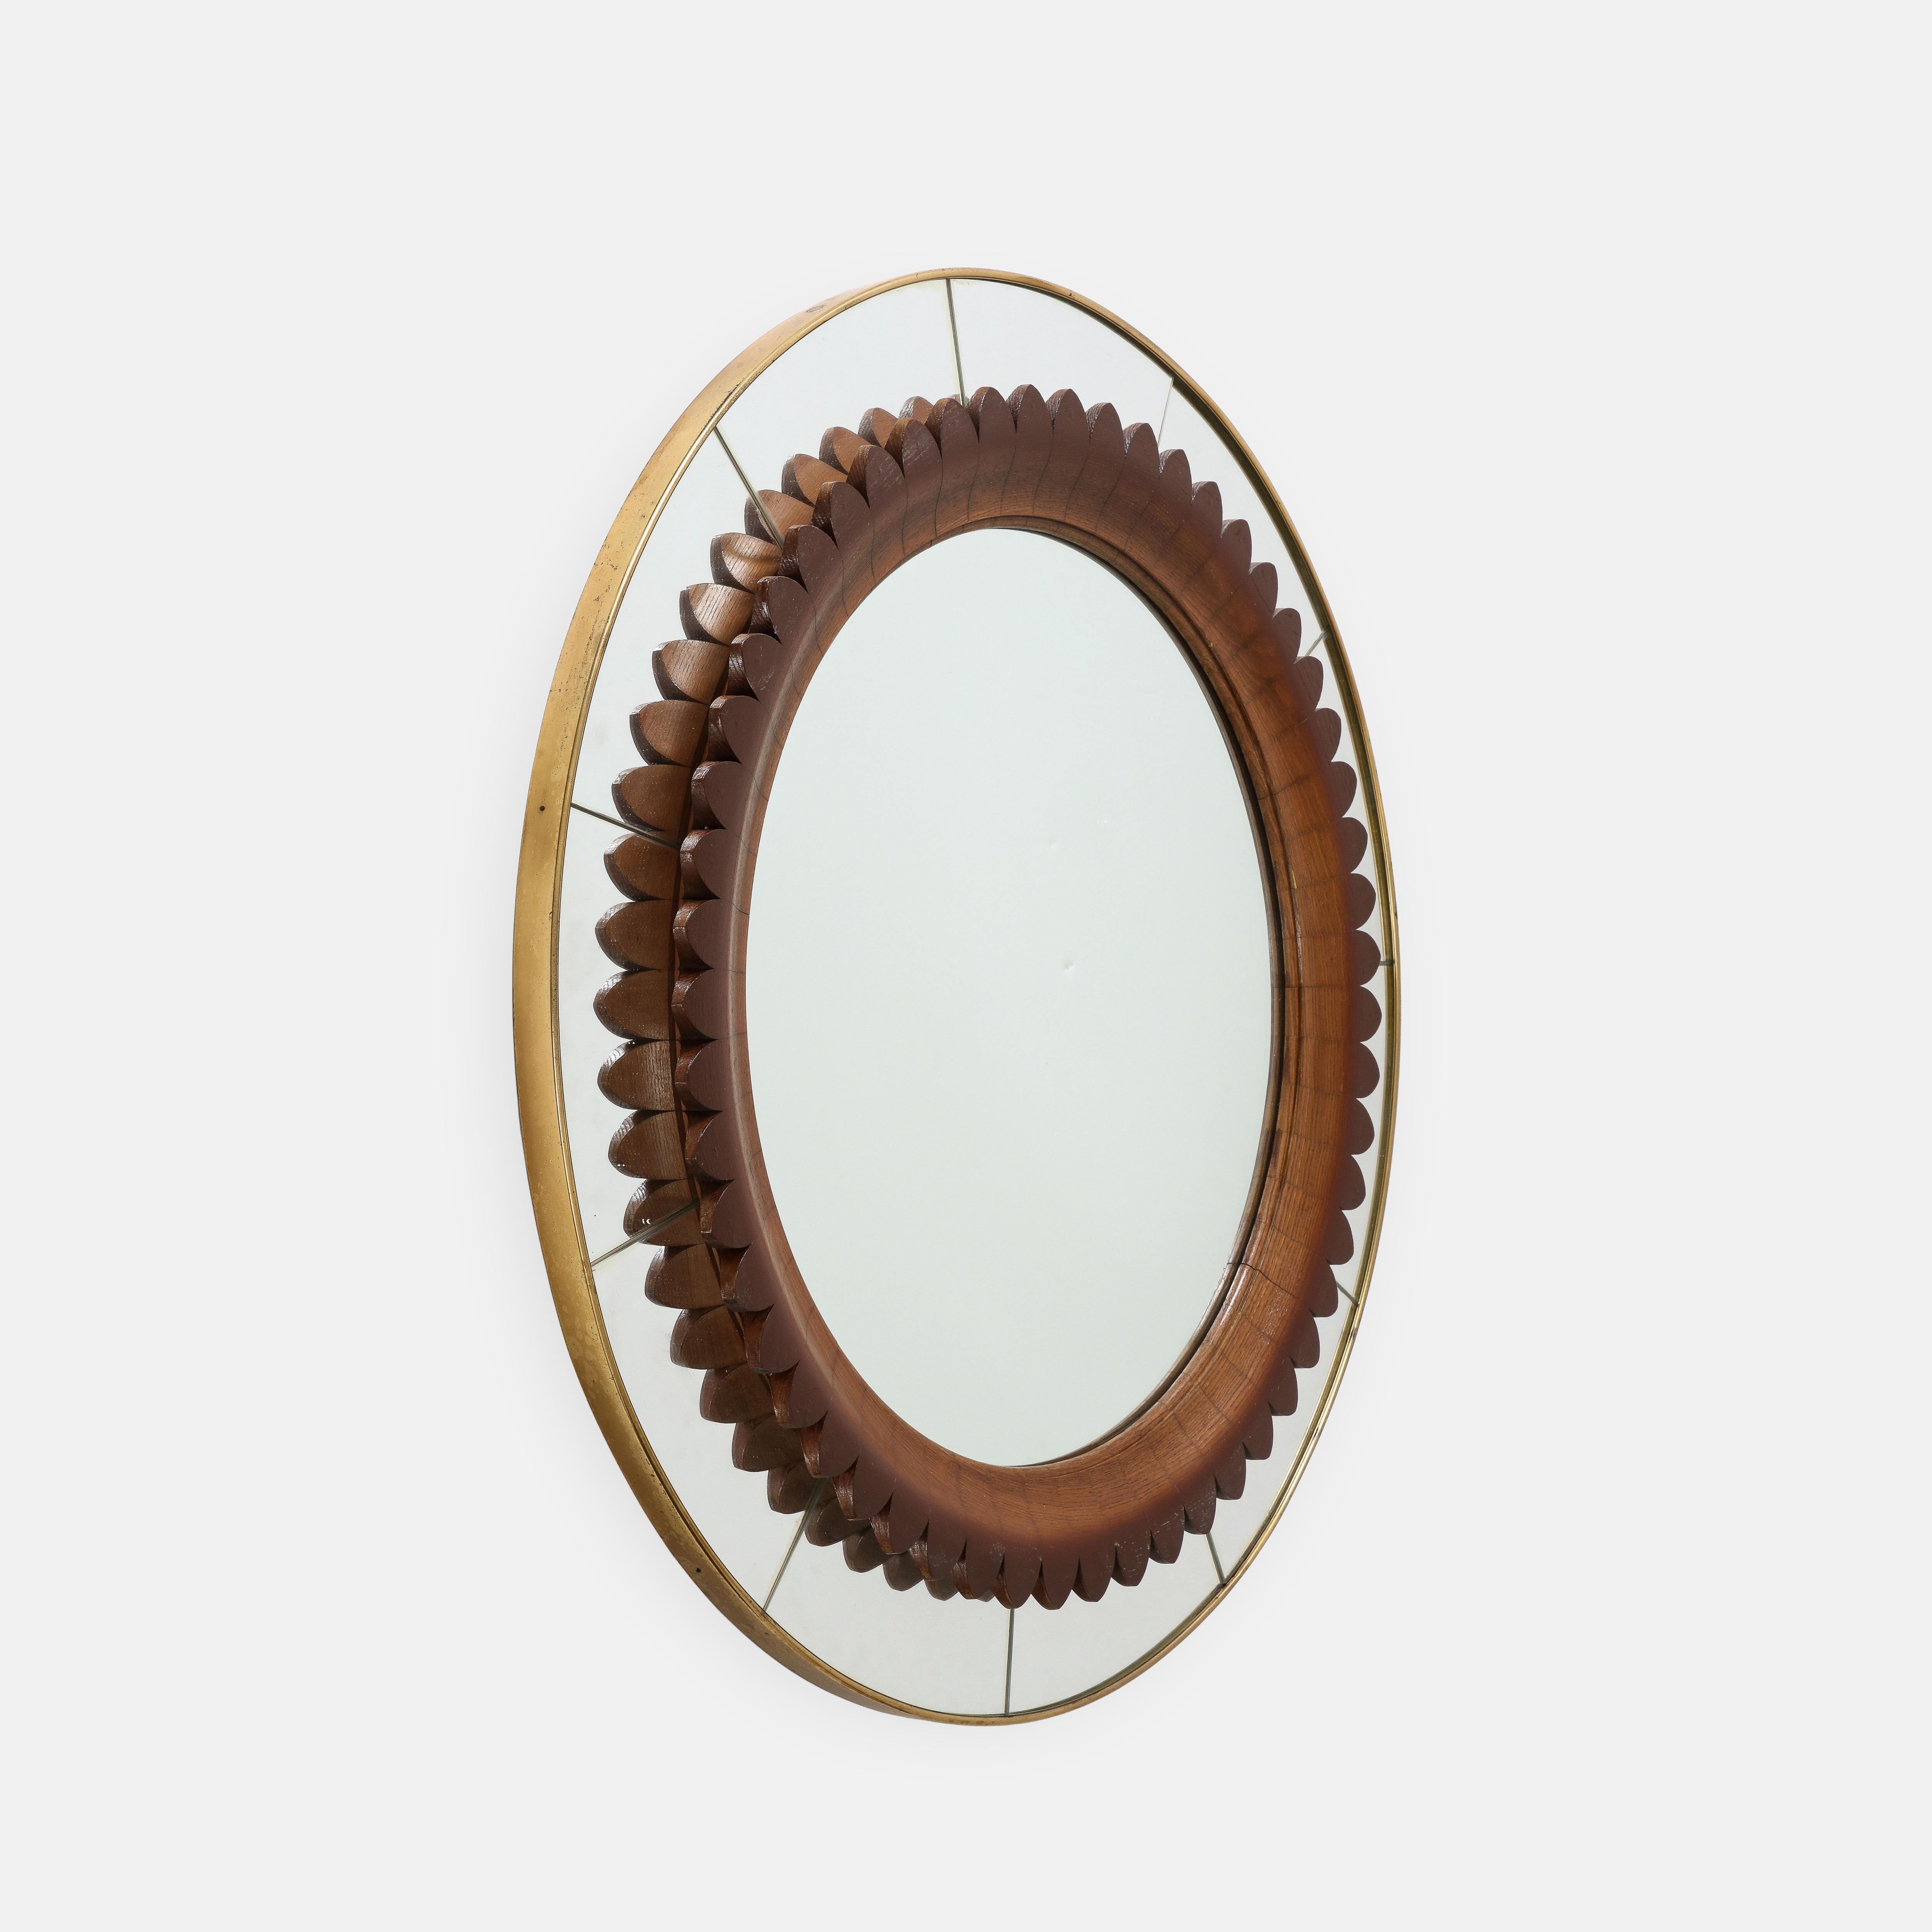 Fratelli Marelli for Framar rare round wall mirror with walnut details, original mirrored glass and brass frame, Italy, 1950s.  This exquisite sculptural mirror has wonderful details throughout including the carved scalloped walnut inner circular